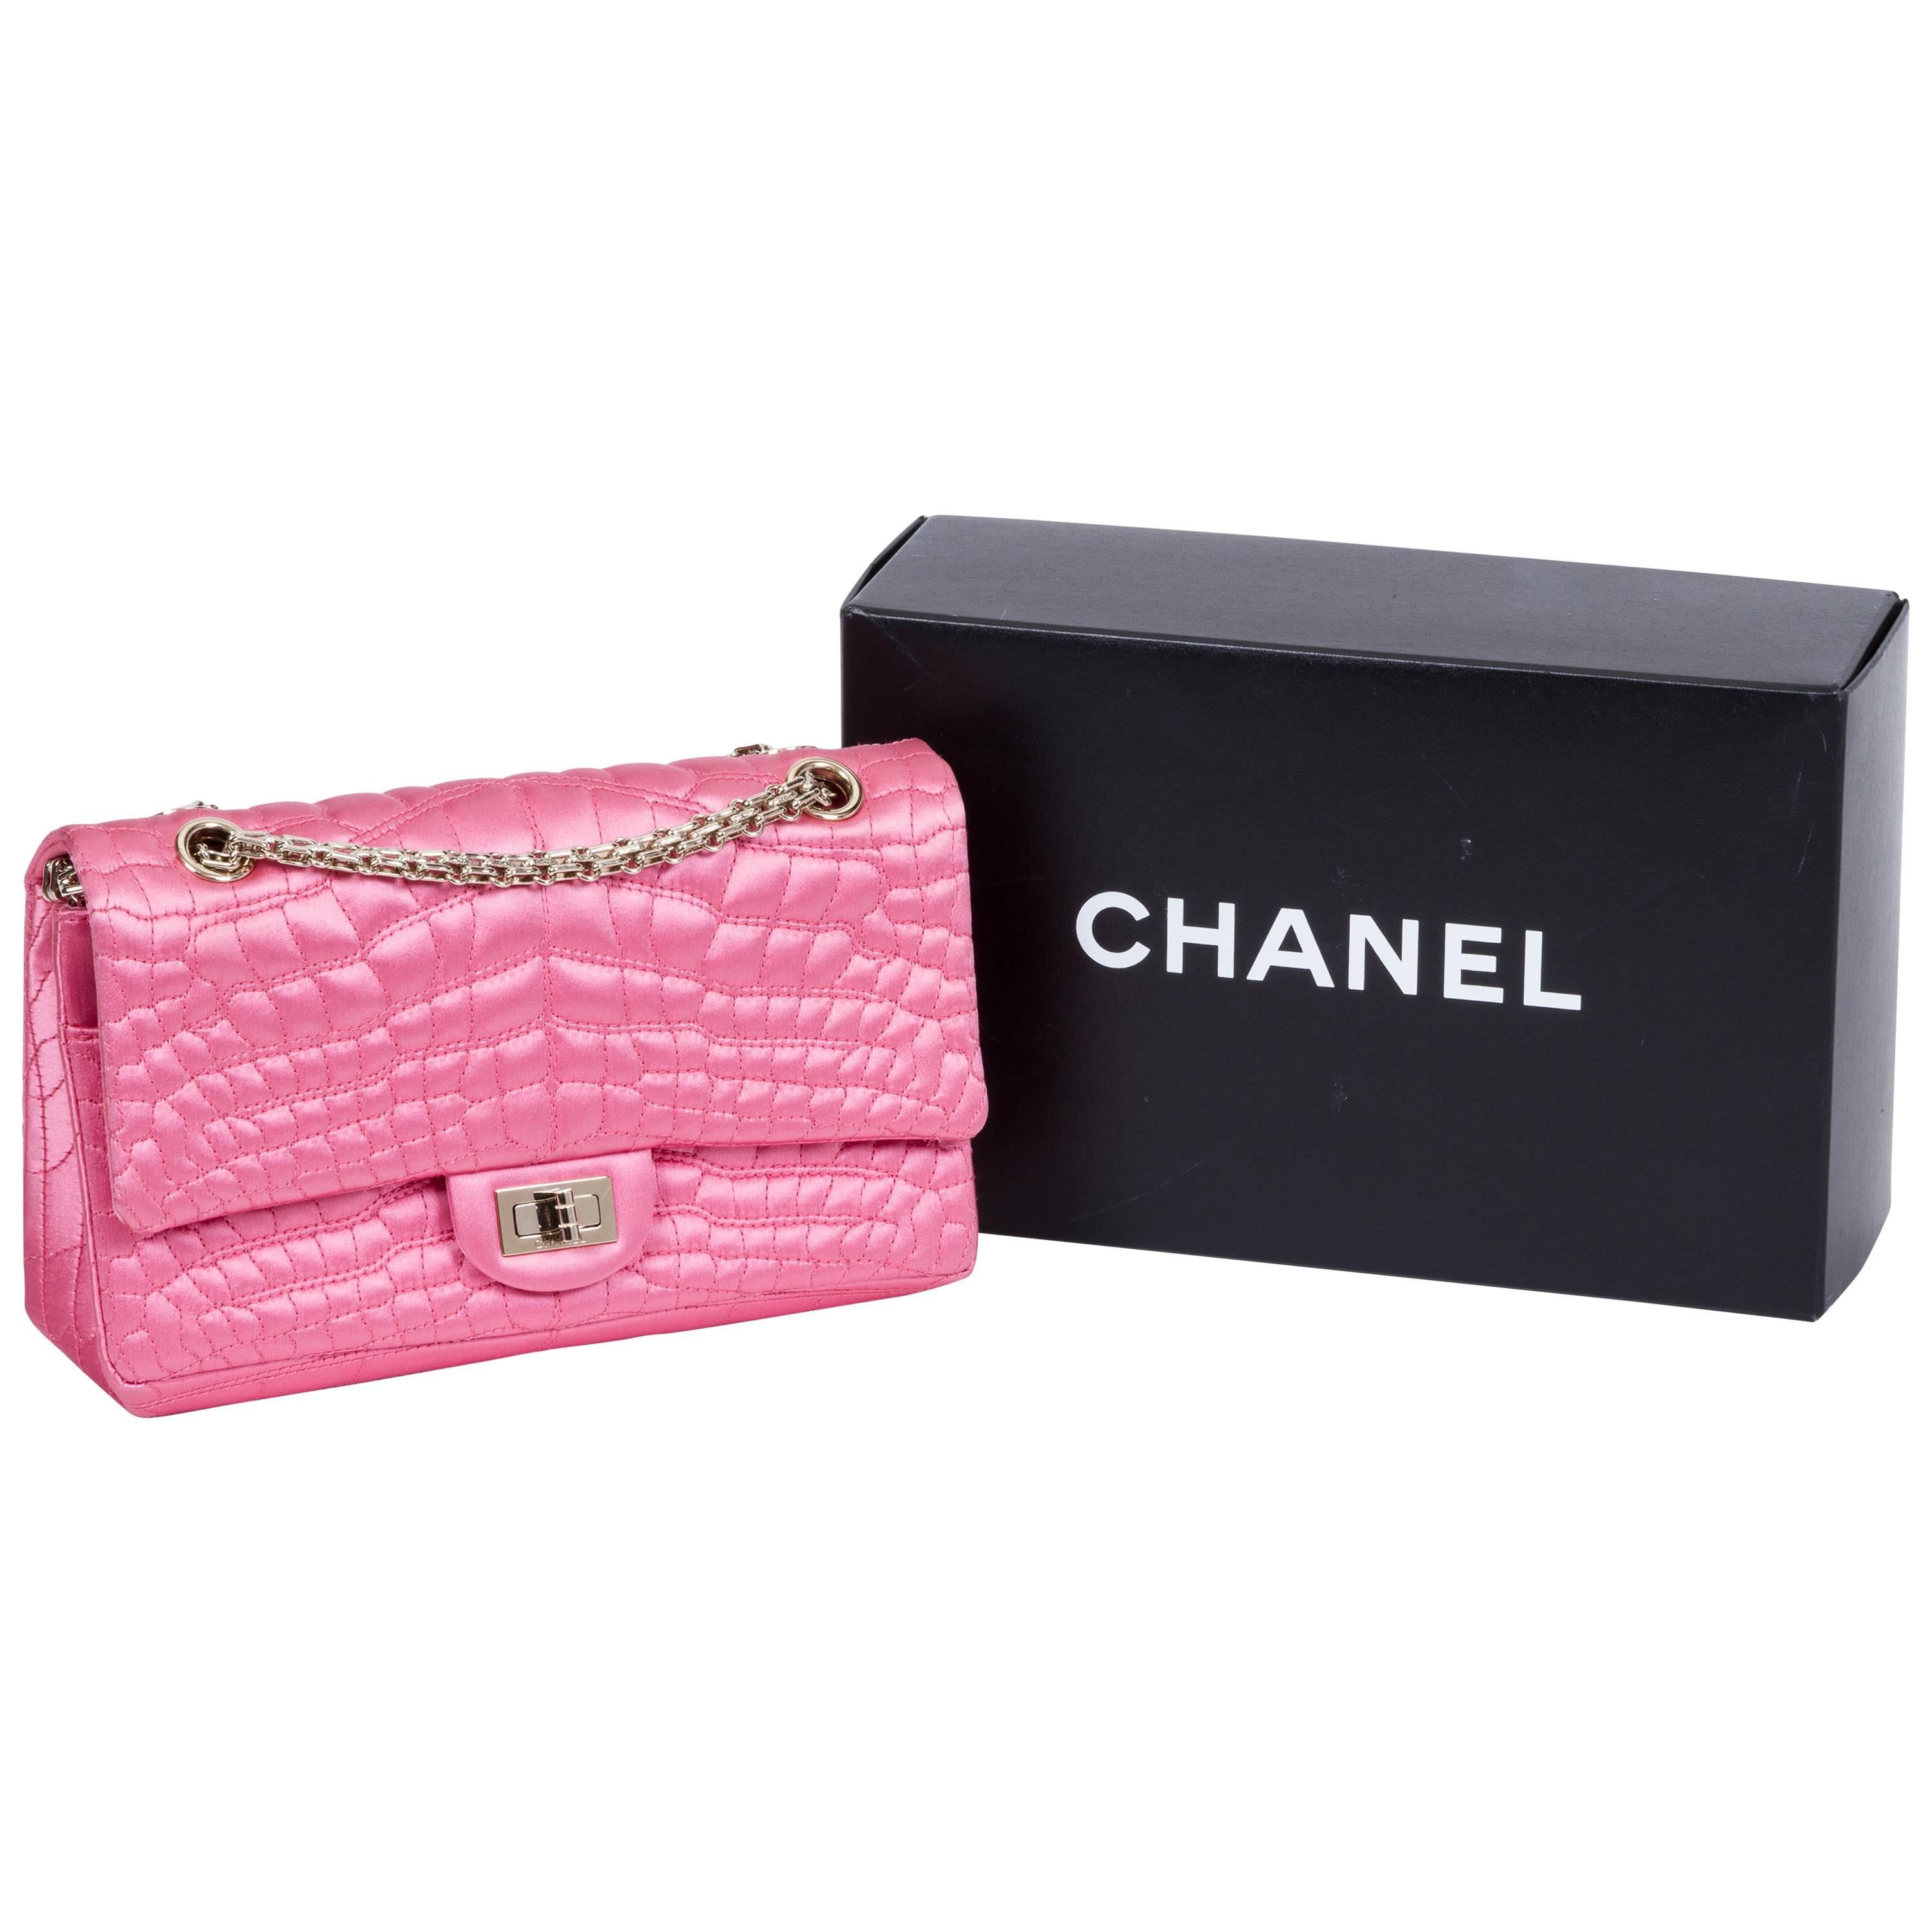 Chanel Pink Satin Silk Croc Embossed Double Flap Bag